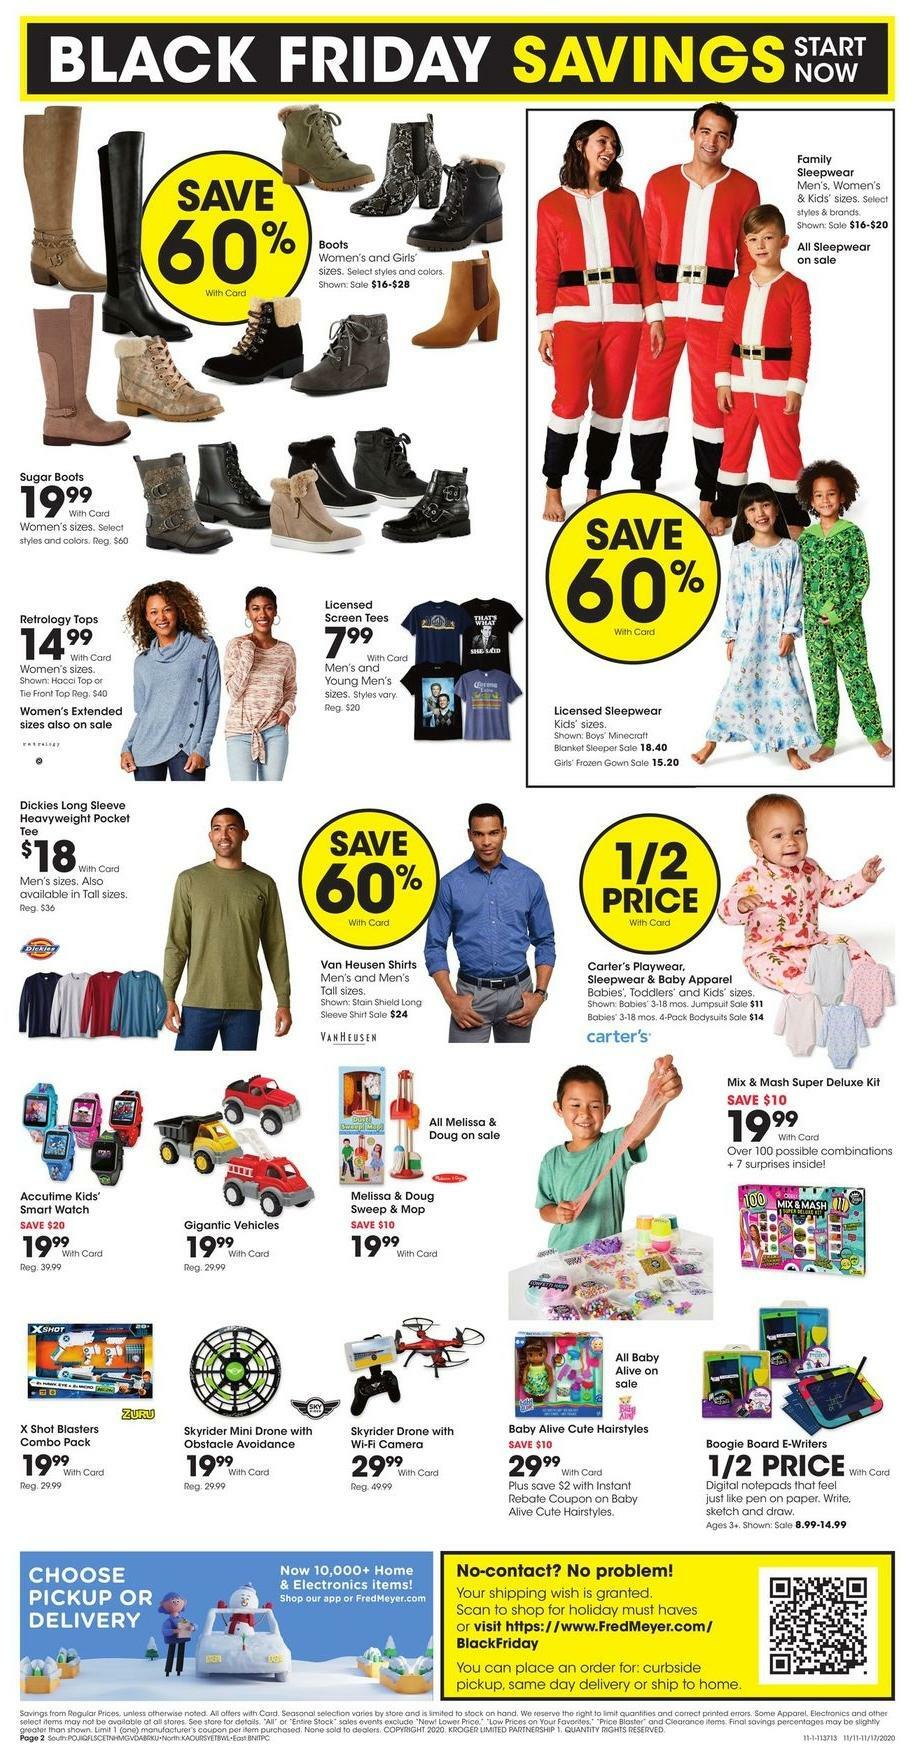 Fred Meyer Black Friday Starts Now Weekly Ad from November 11